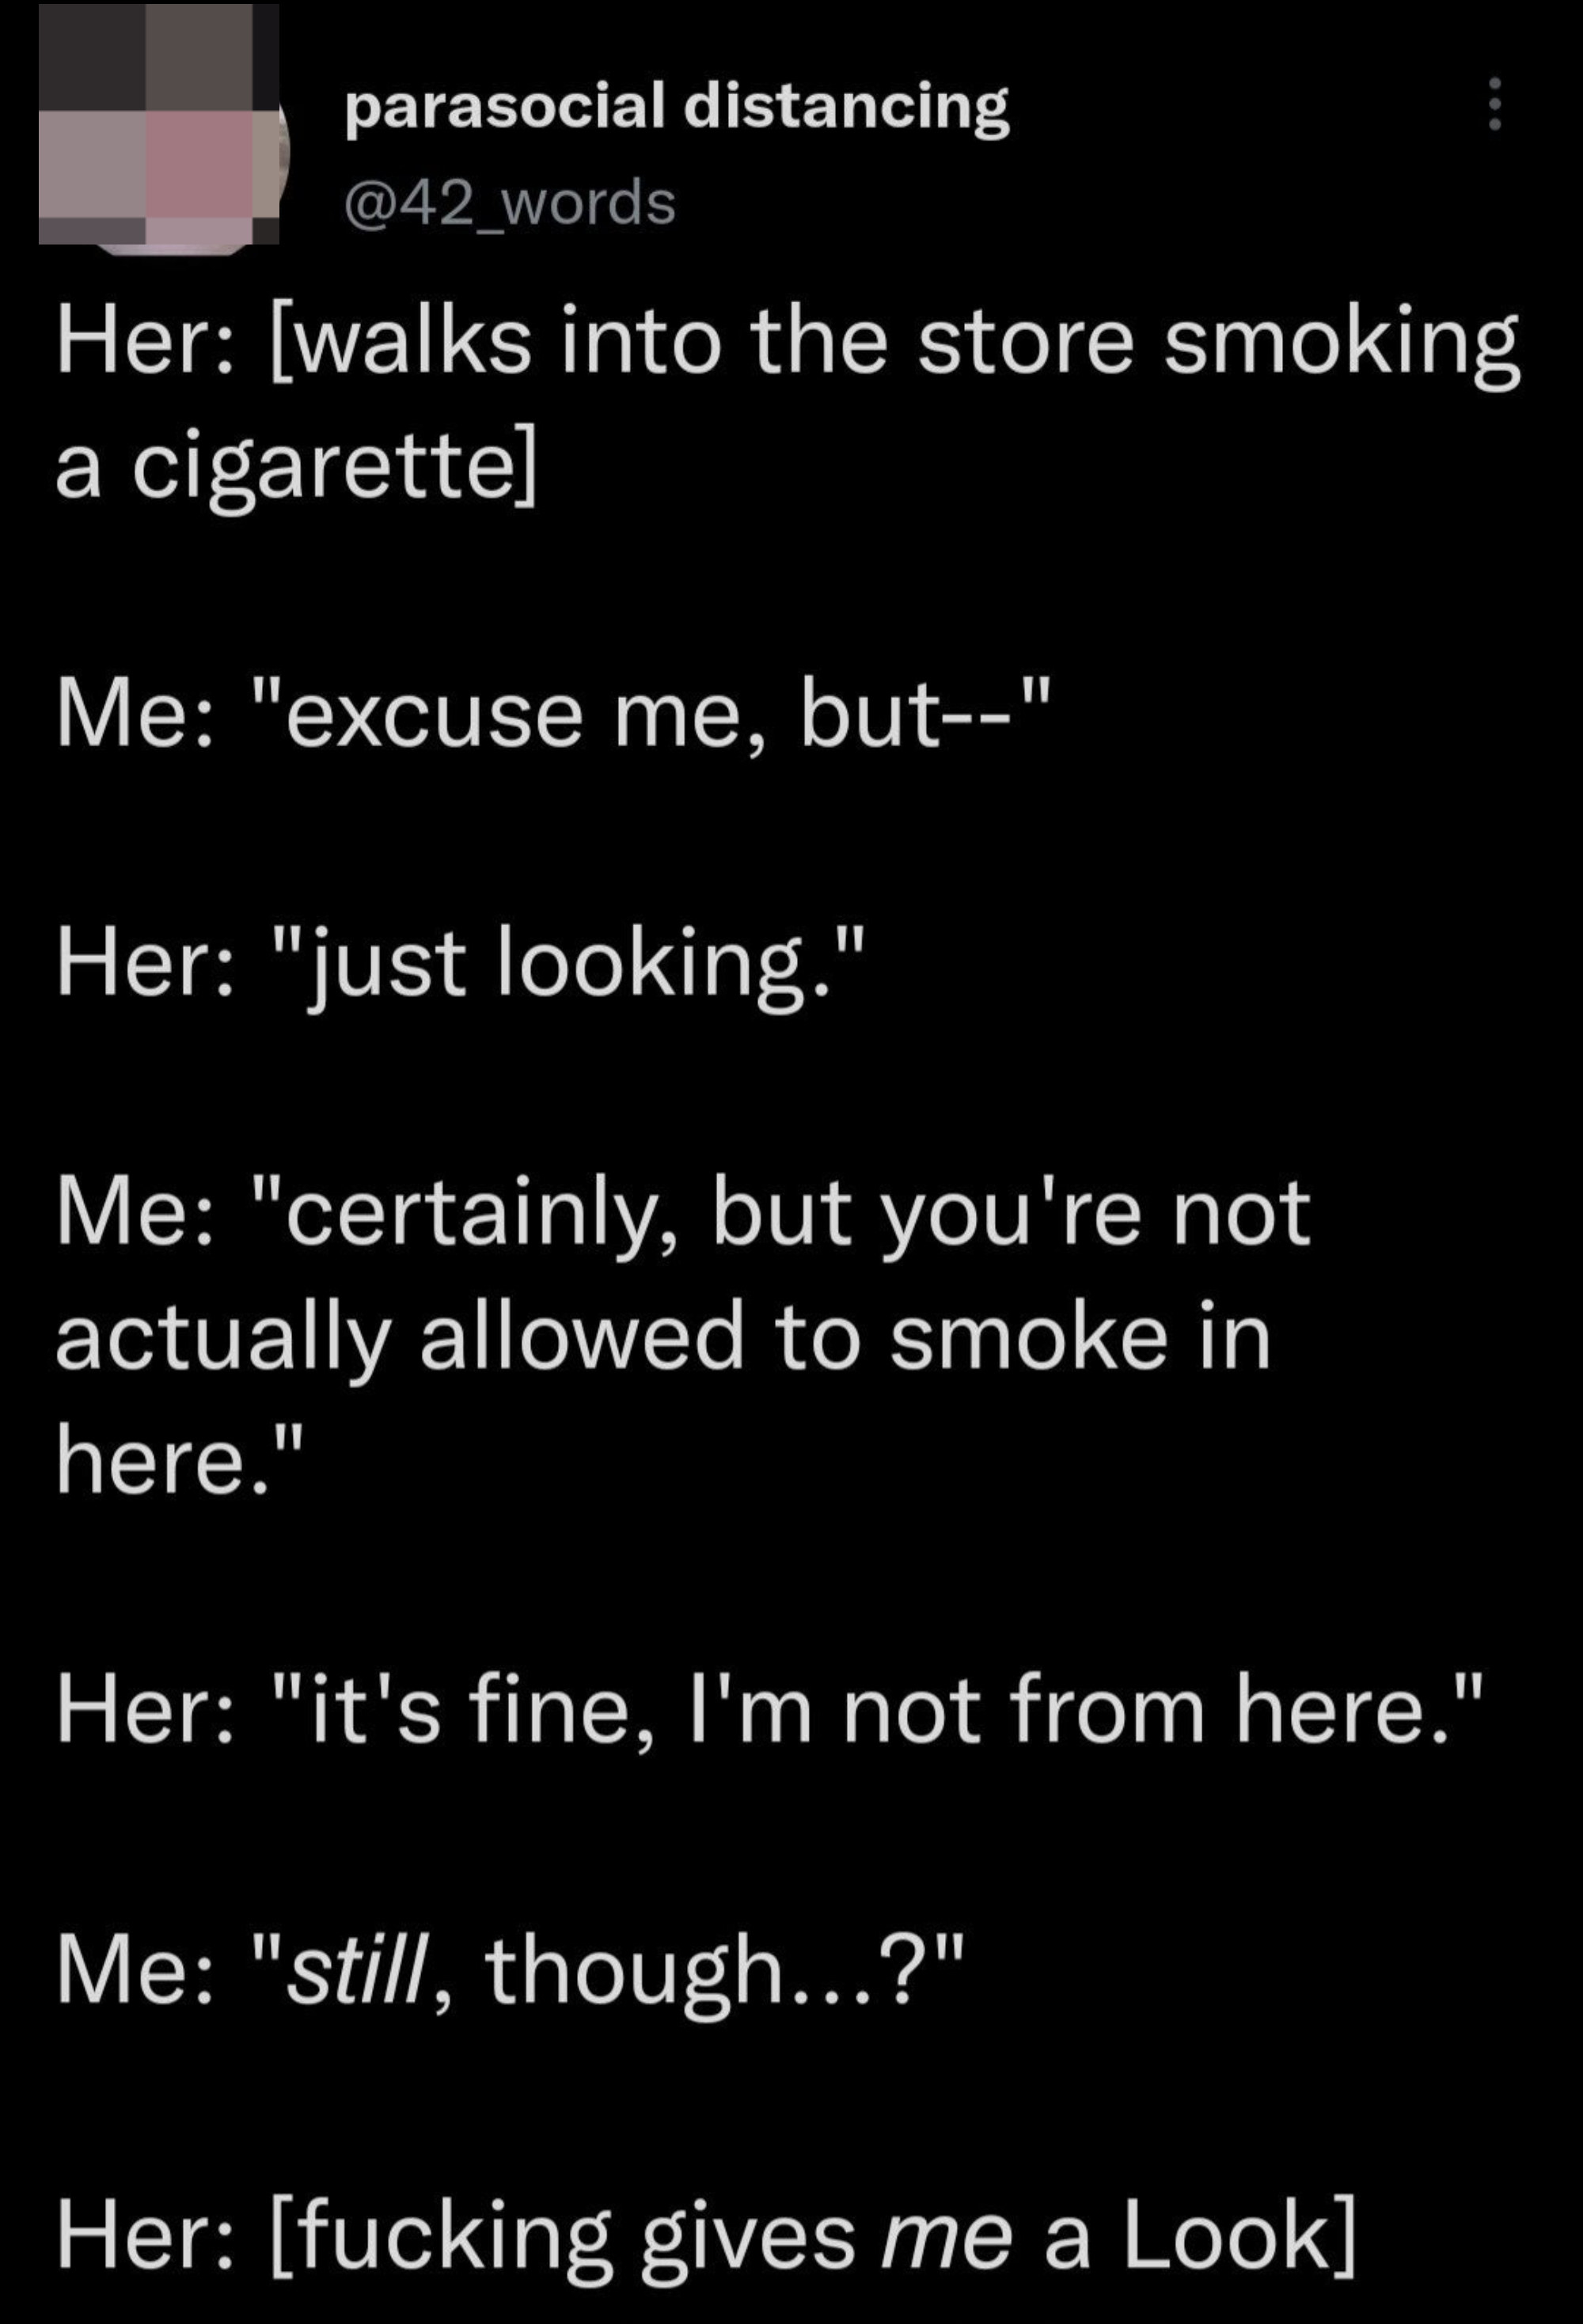 customer walks in smoking a cigarette and refuses to stop